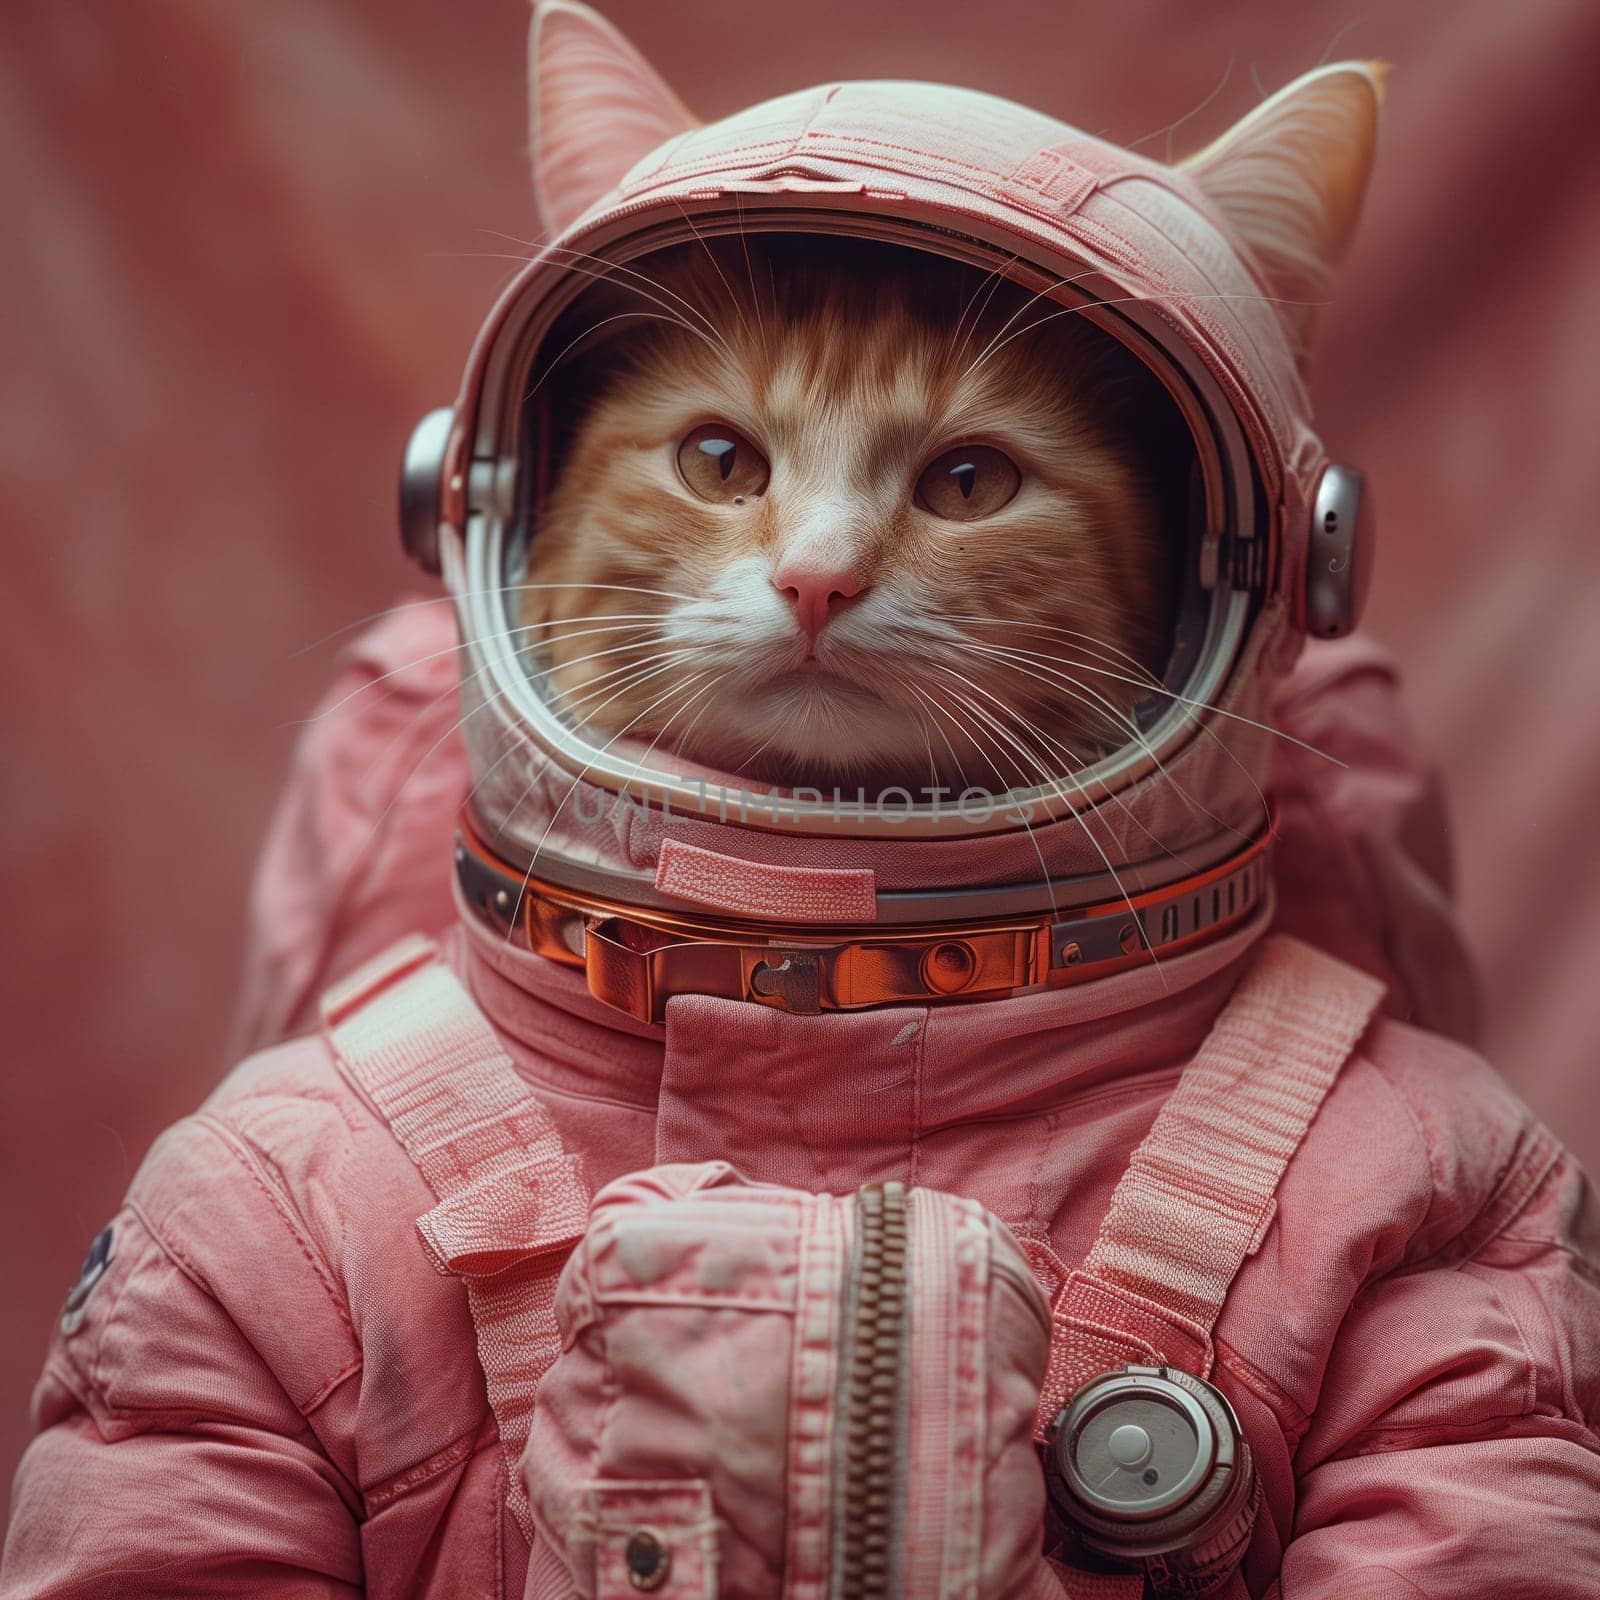 A Felidae wearing a pink space suit and helmet, showcasing its whiskers and collar. The small to mediumsized carnivore looks adorable in the electric blue headgear, ready for a selfie